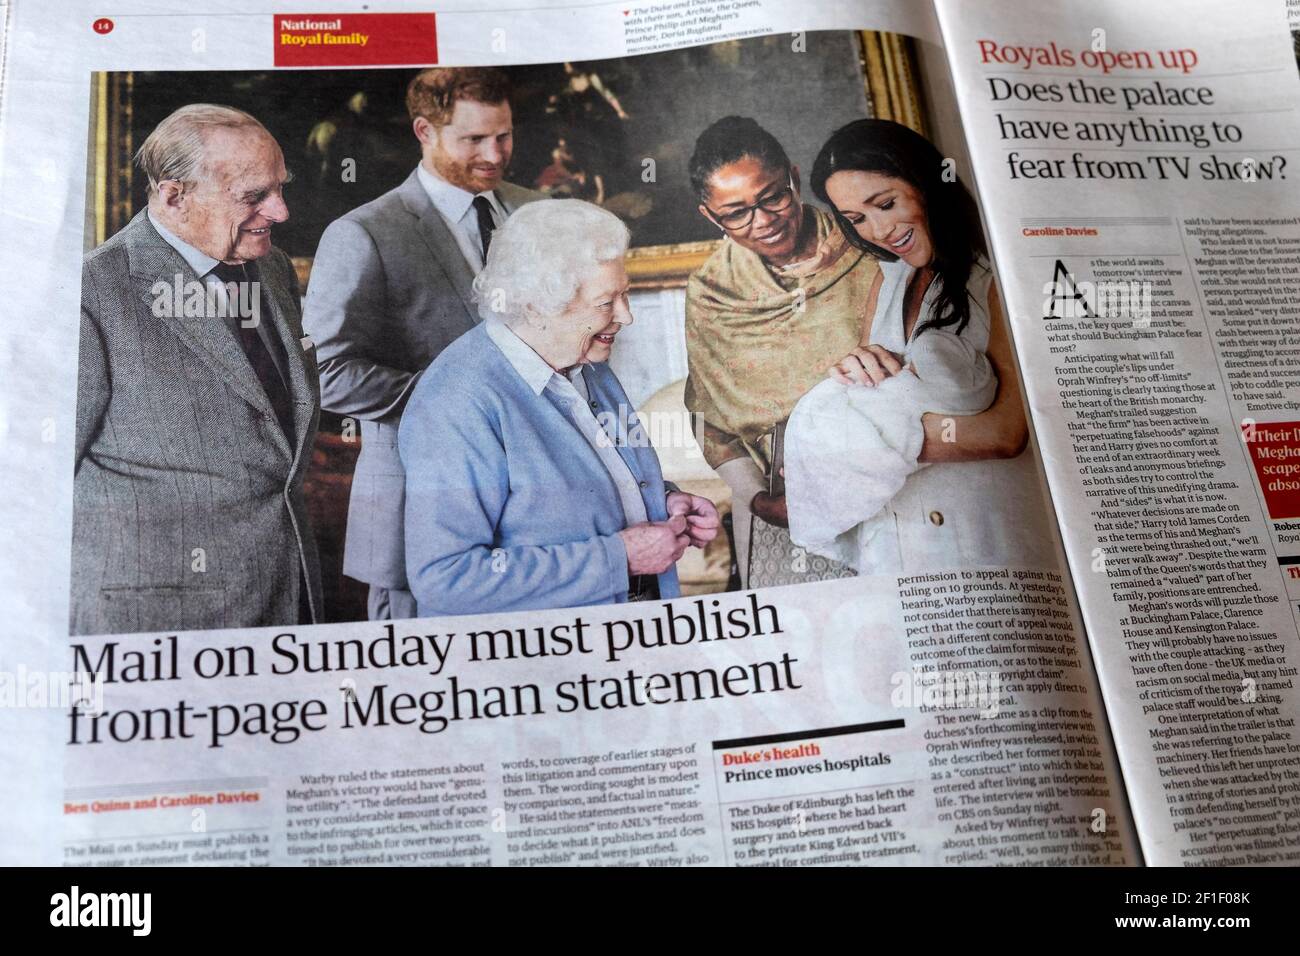 'Mail on Sunday must publish front-page Meghan statement' Royals Queen Meghan Markle Prince Harry baby Archie newspaper article on 5 March 2021 London Stock Photo